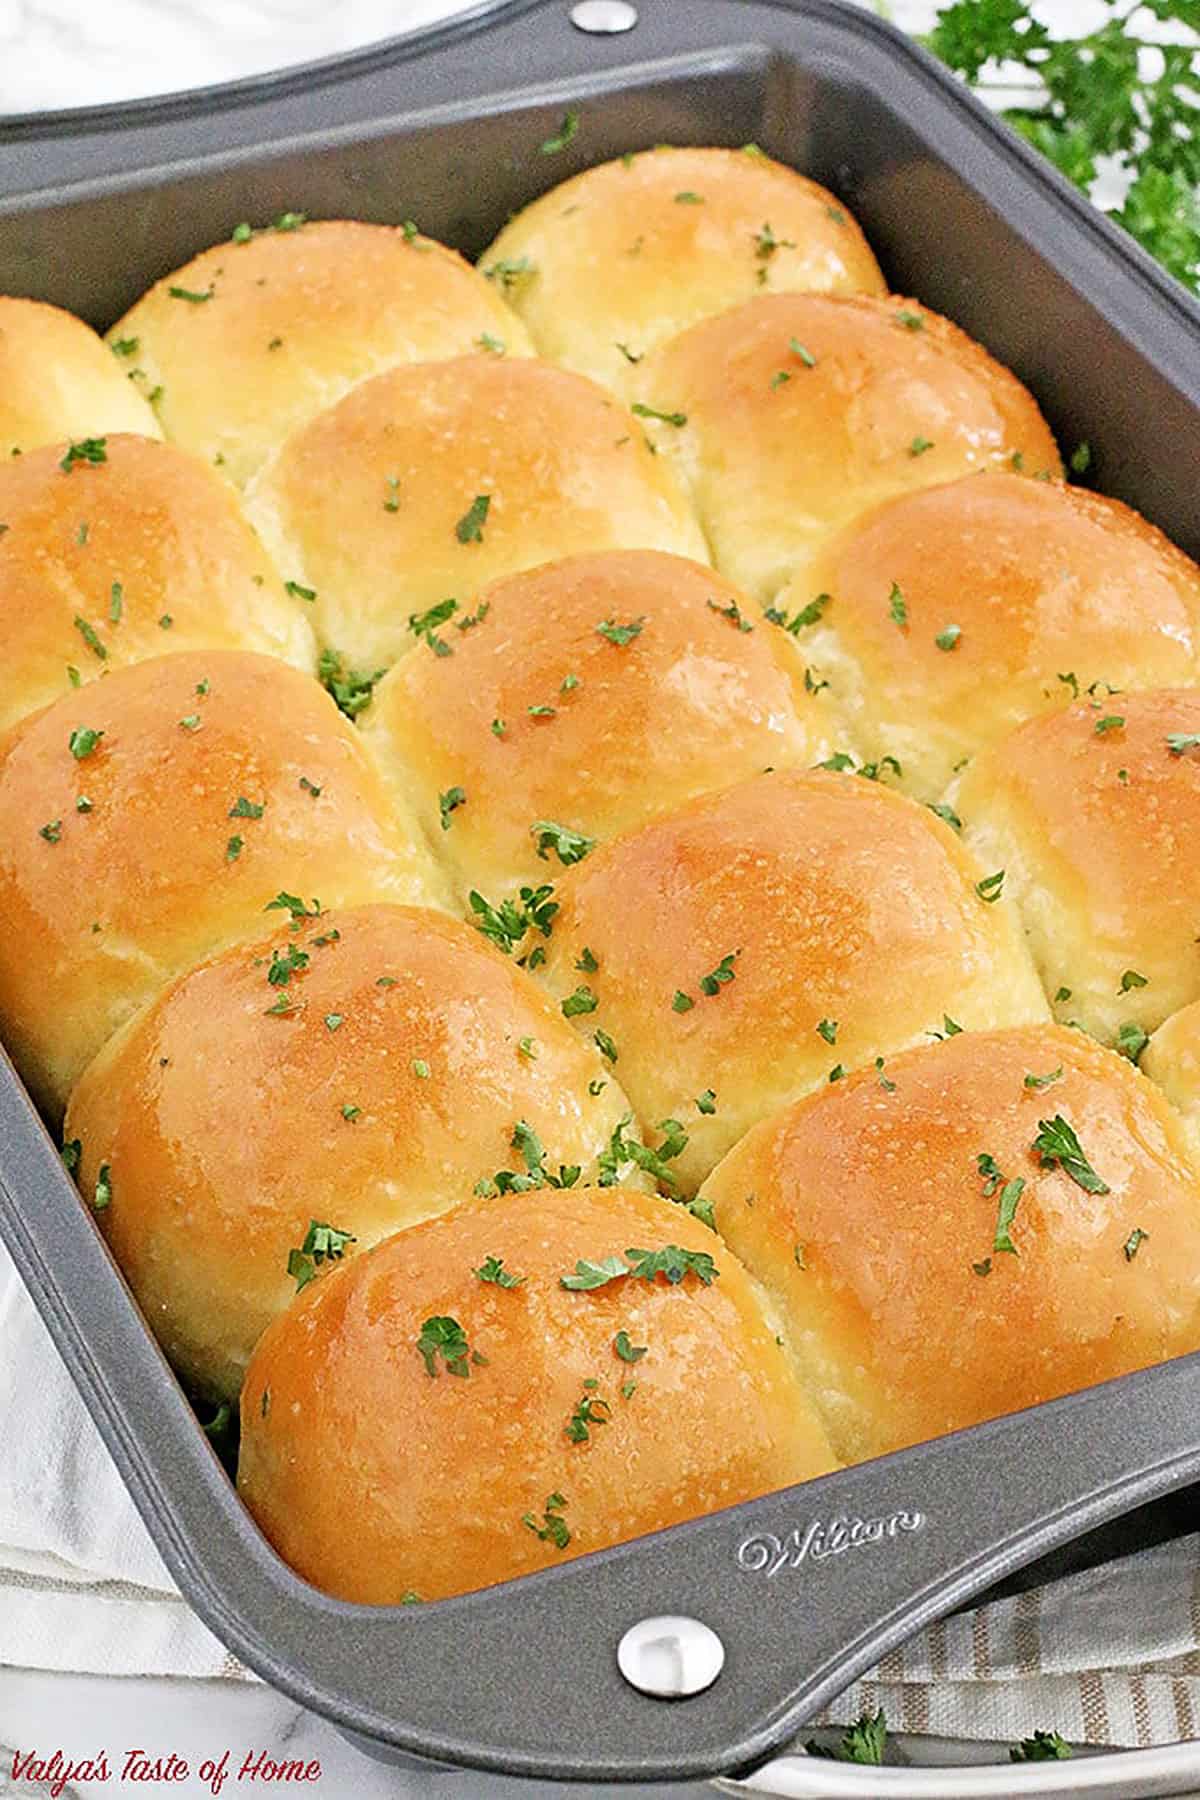 Potato rolls are deliciously soft yeast bread that has a special ingredient which is mashed potatoes! By adding mashed potatoes, you get pillowy soft bread that stays soft for a lot longer than traditional dinner rolls.